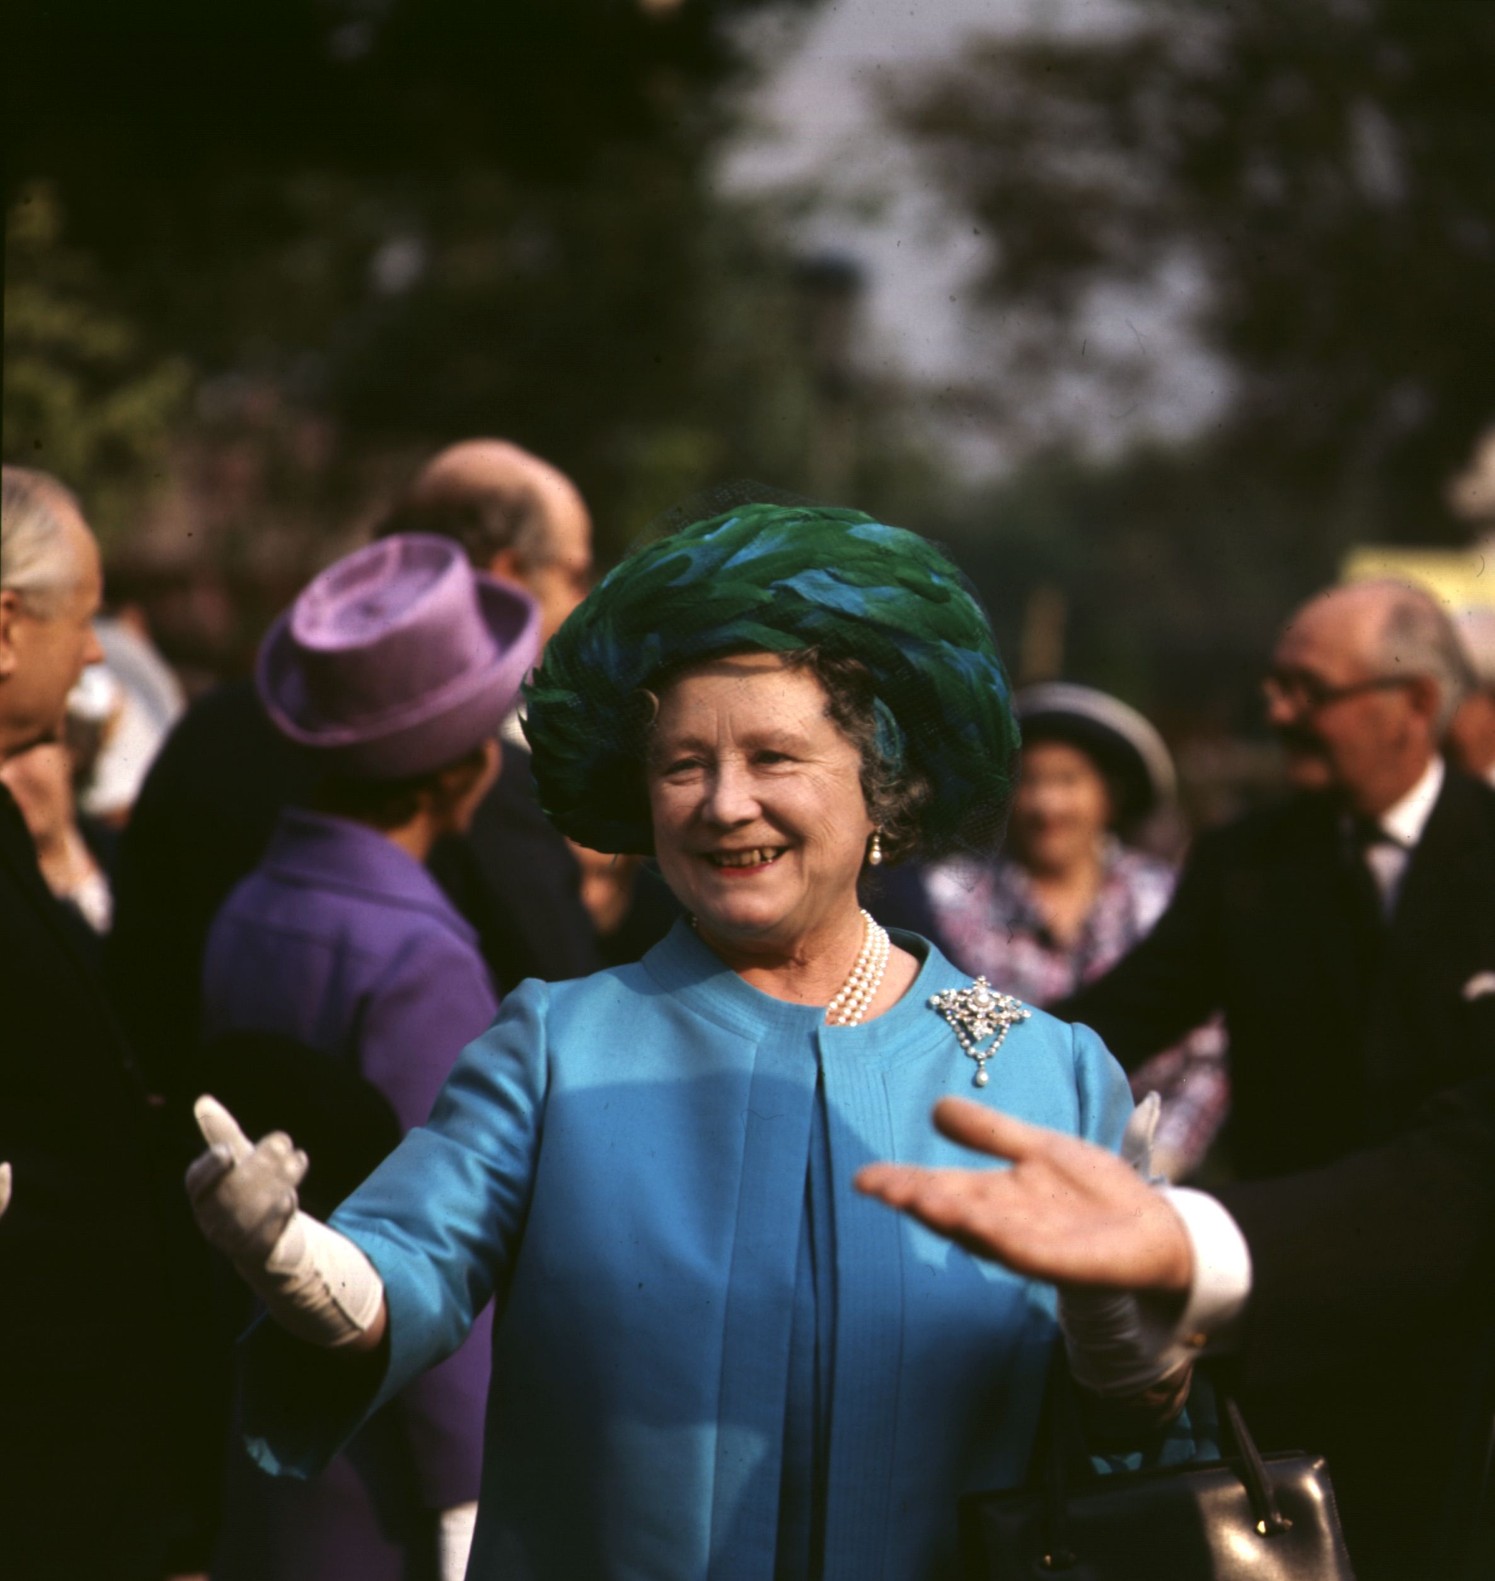 May 1971: Queen Elizabeth The Queen Mother during a visit to the Chelsea Flower Show